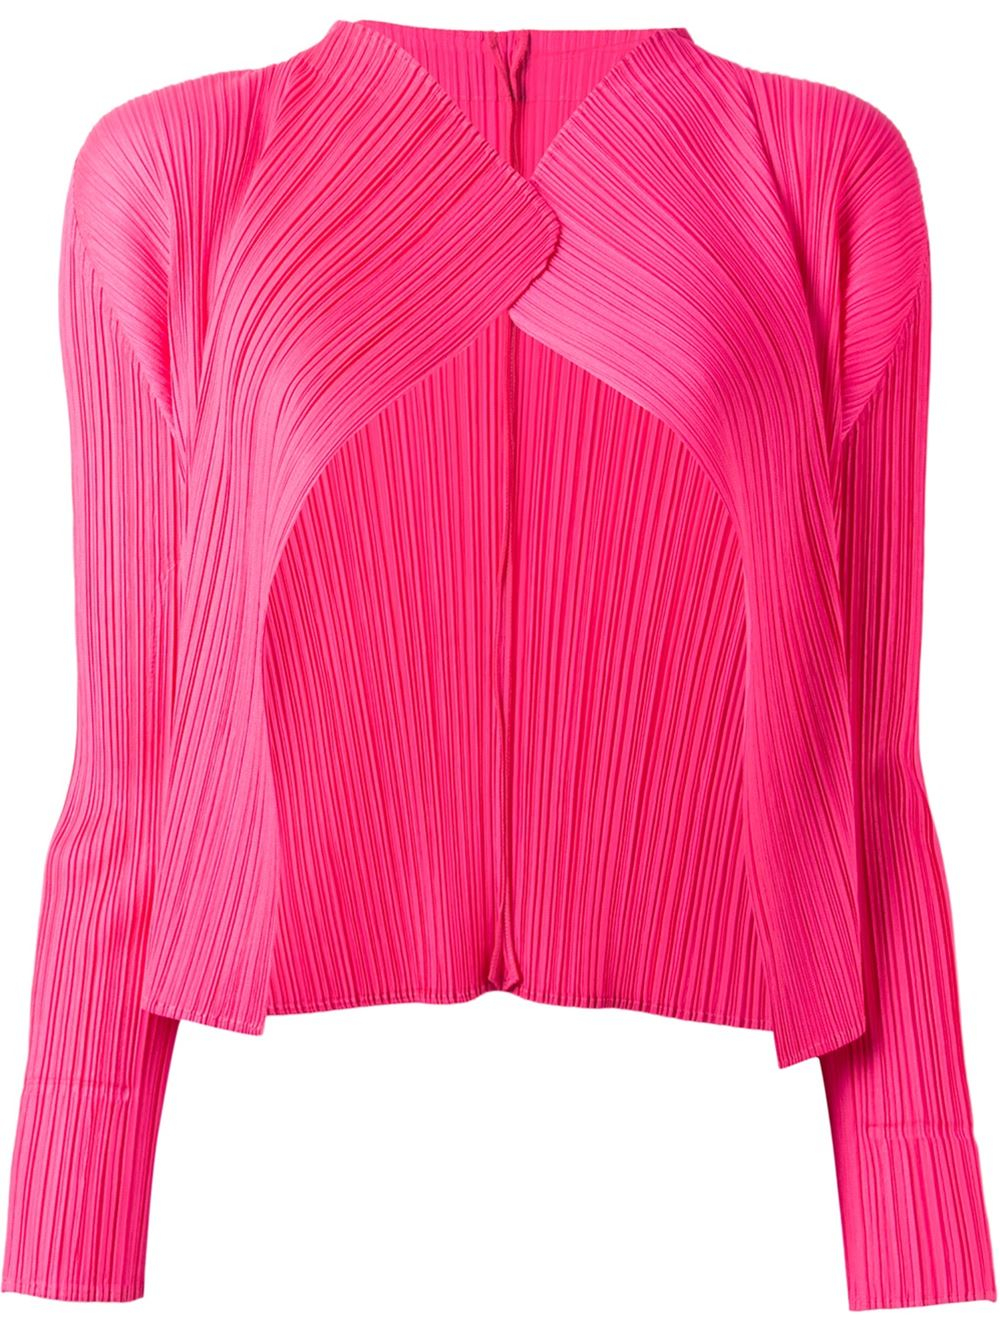 Lyst - Pleats Please Issey Miyake Cropped Pleated Jacket in Pink